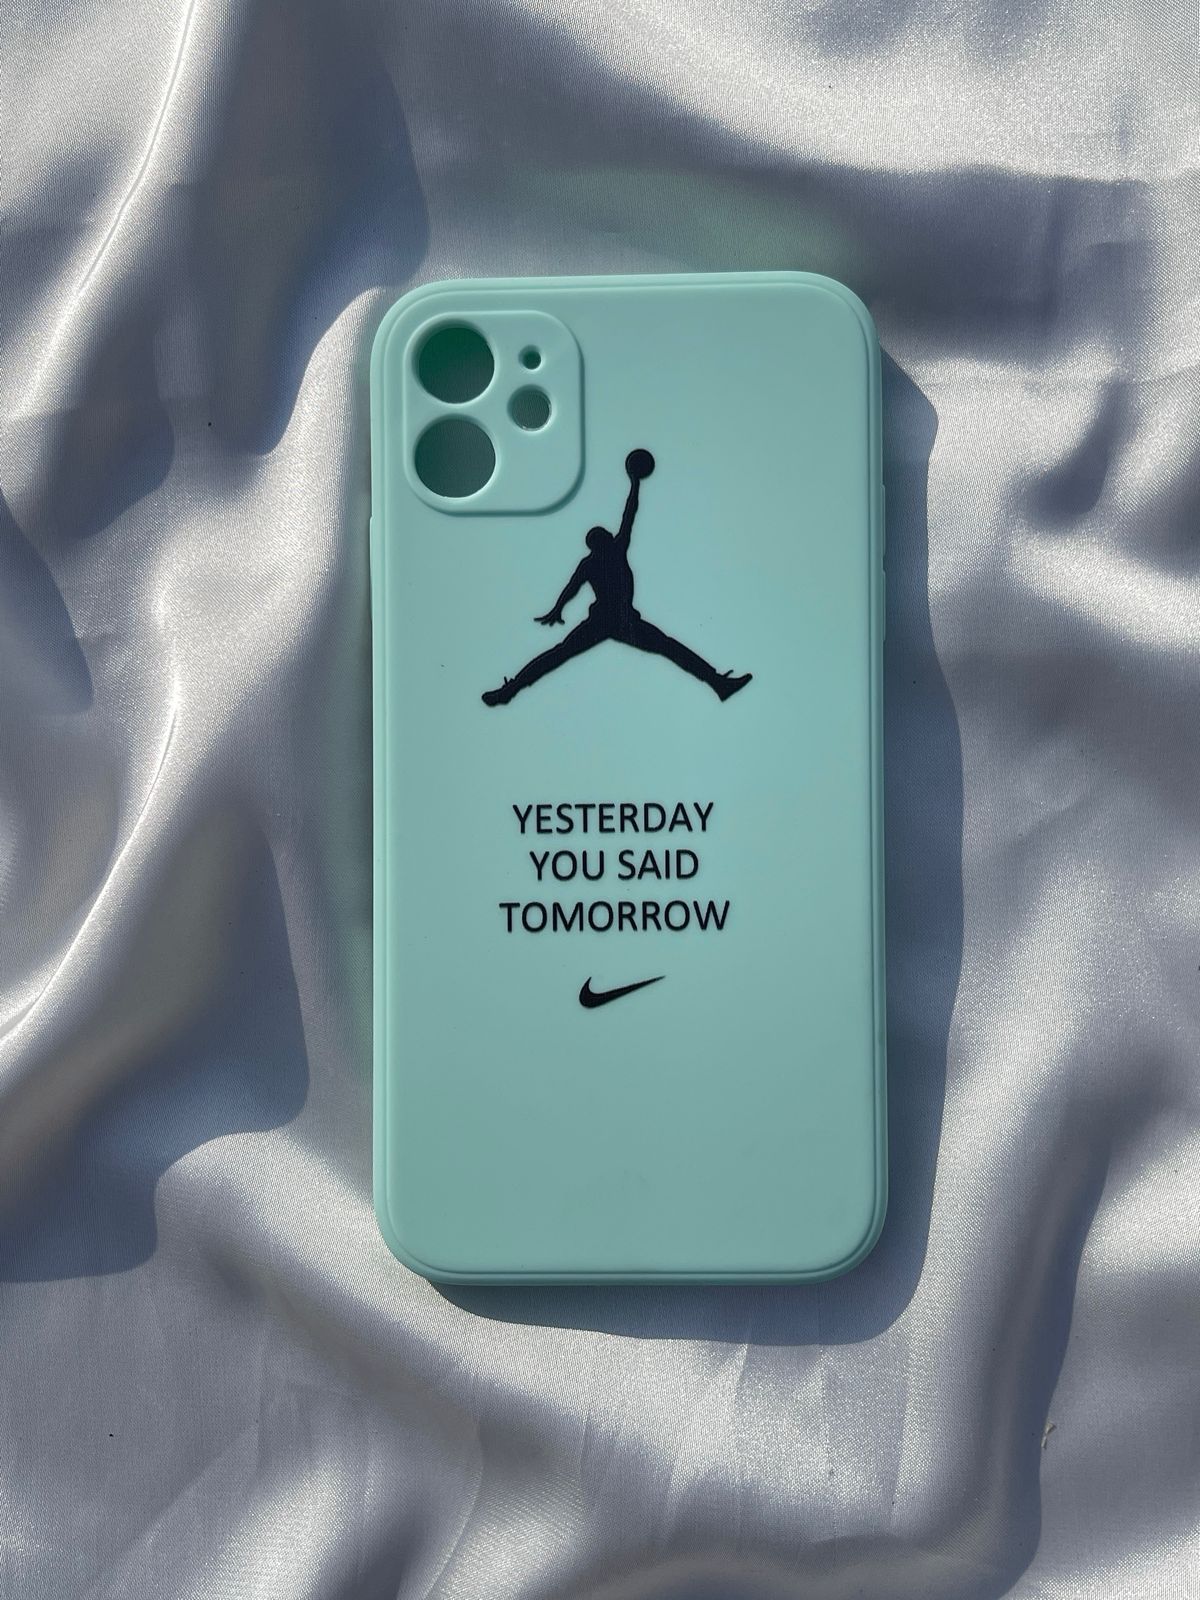 iPhone "12" Silicone Case "Yesterday You Said Tomorrow" Edition